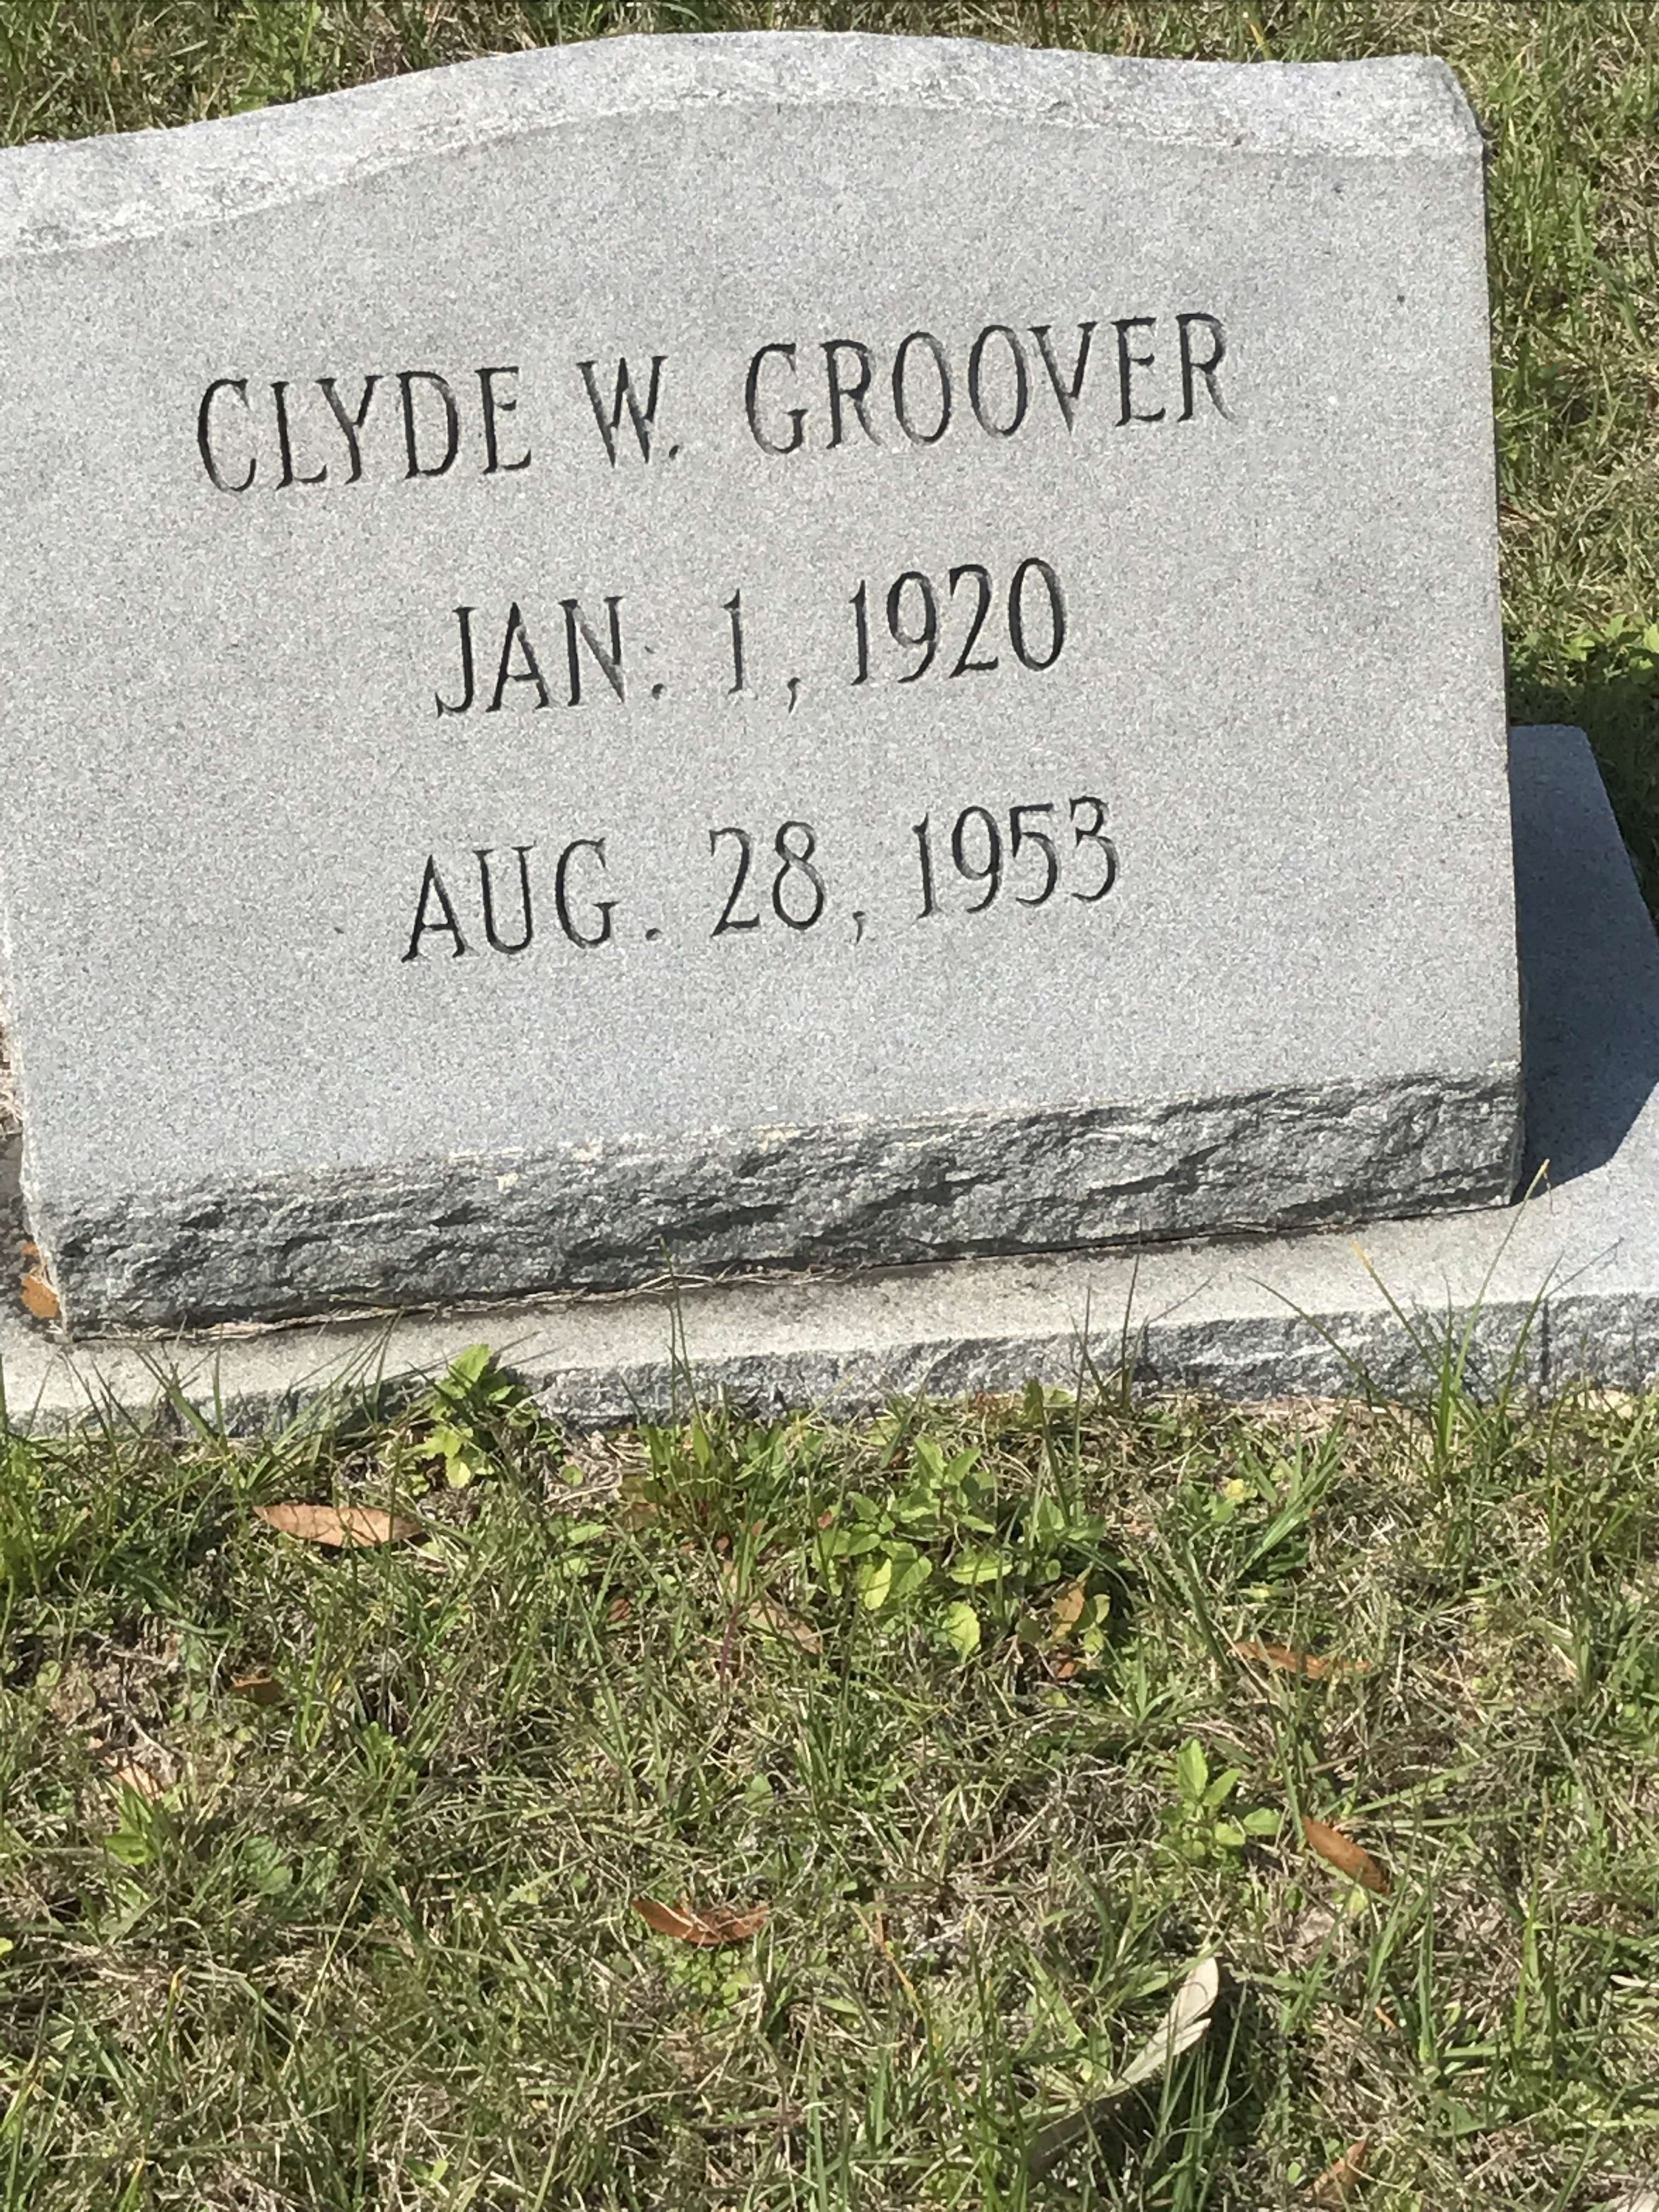 Clyde W. Groover